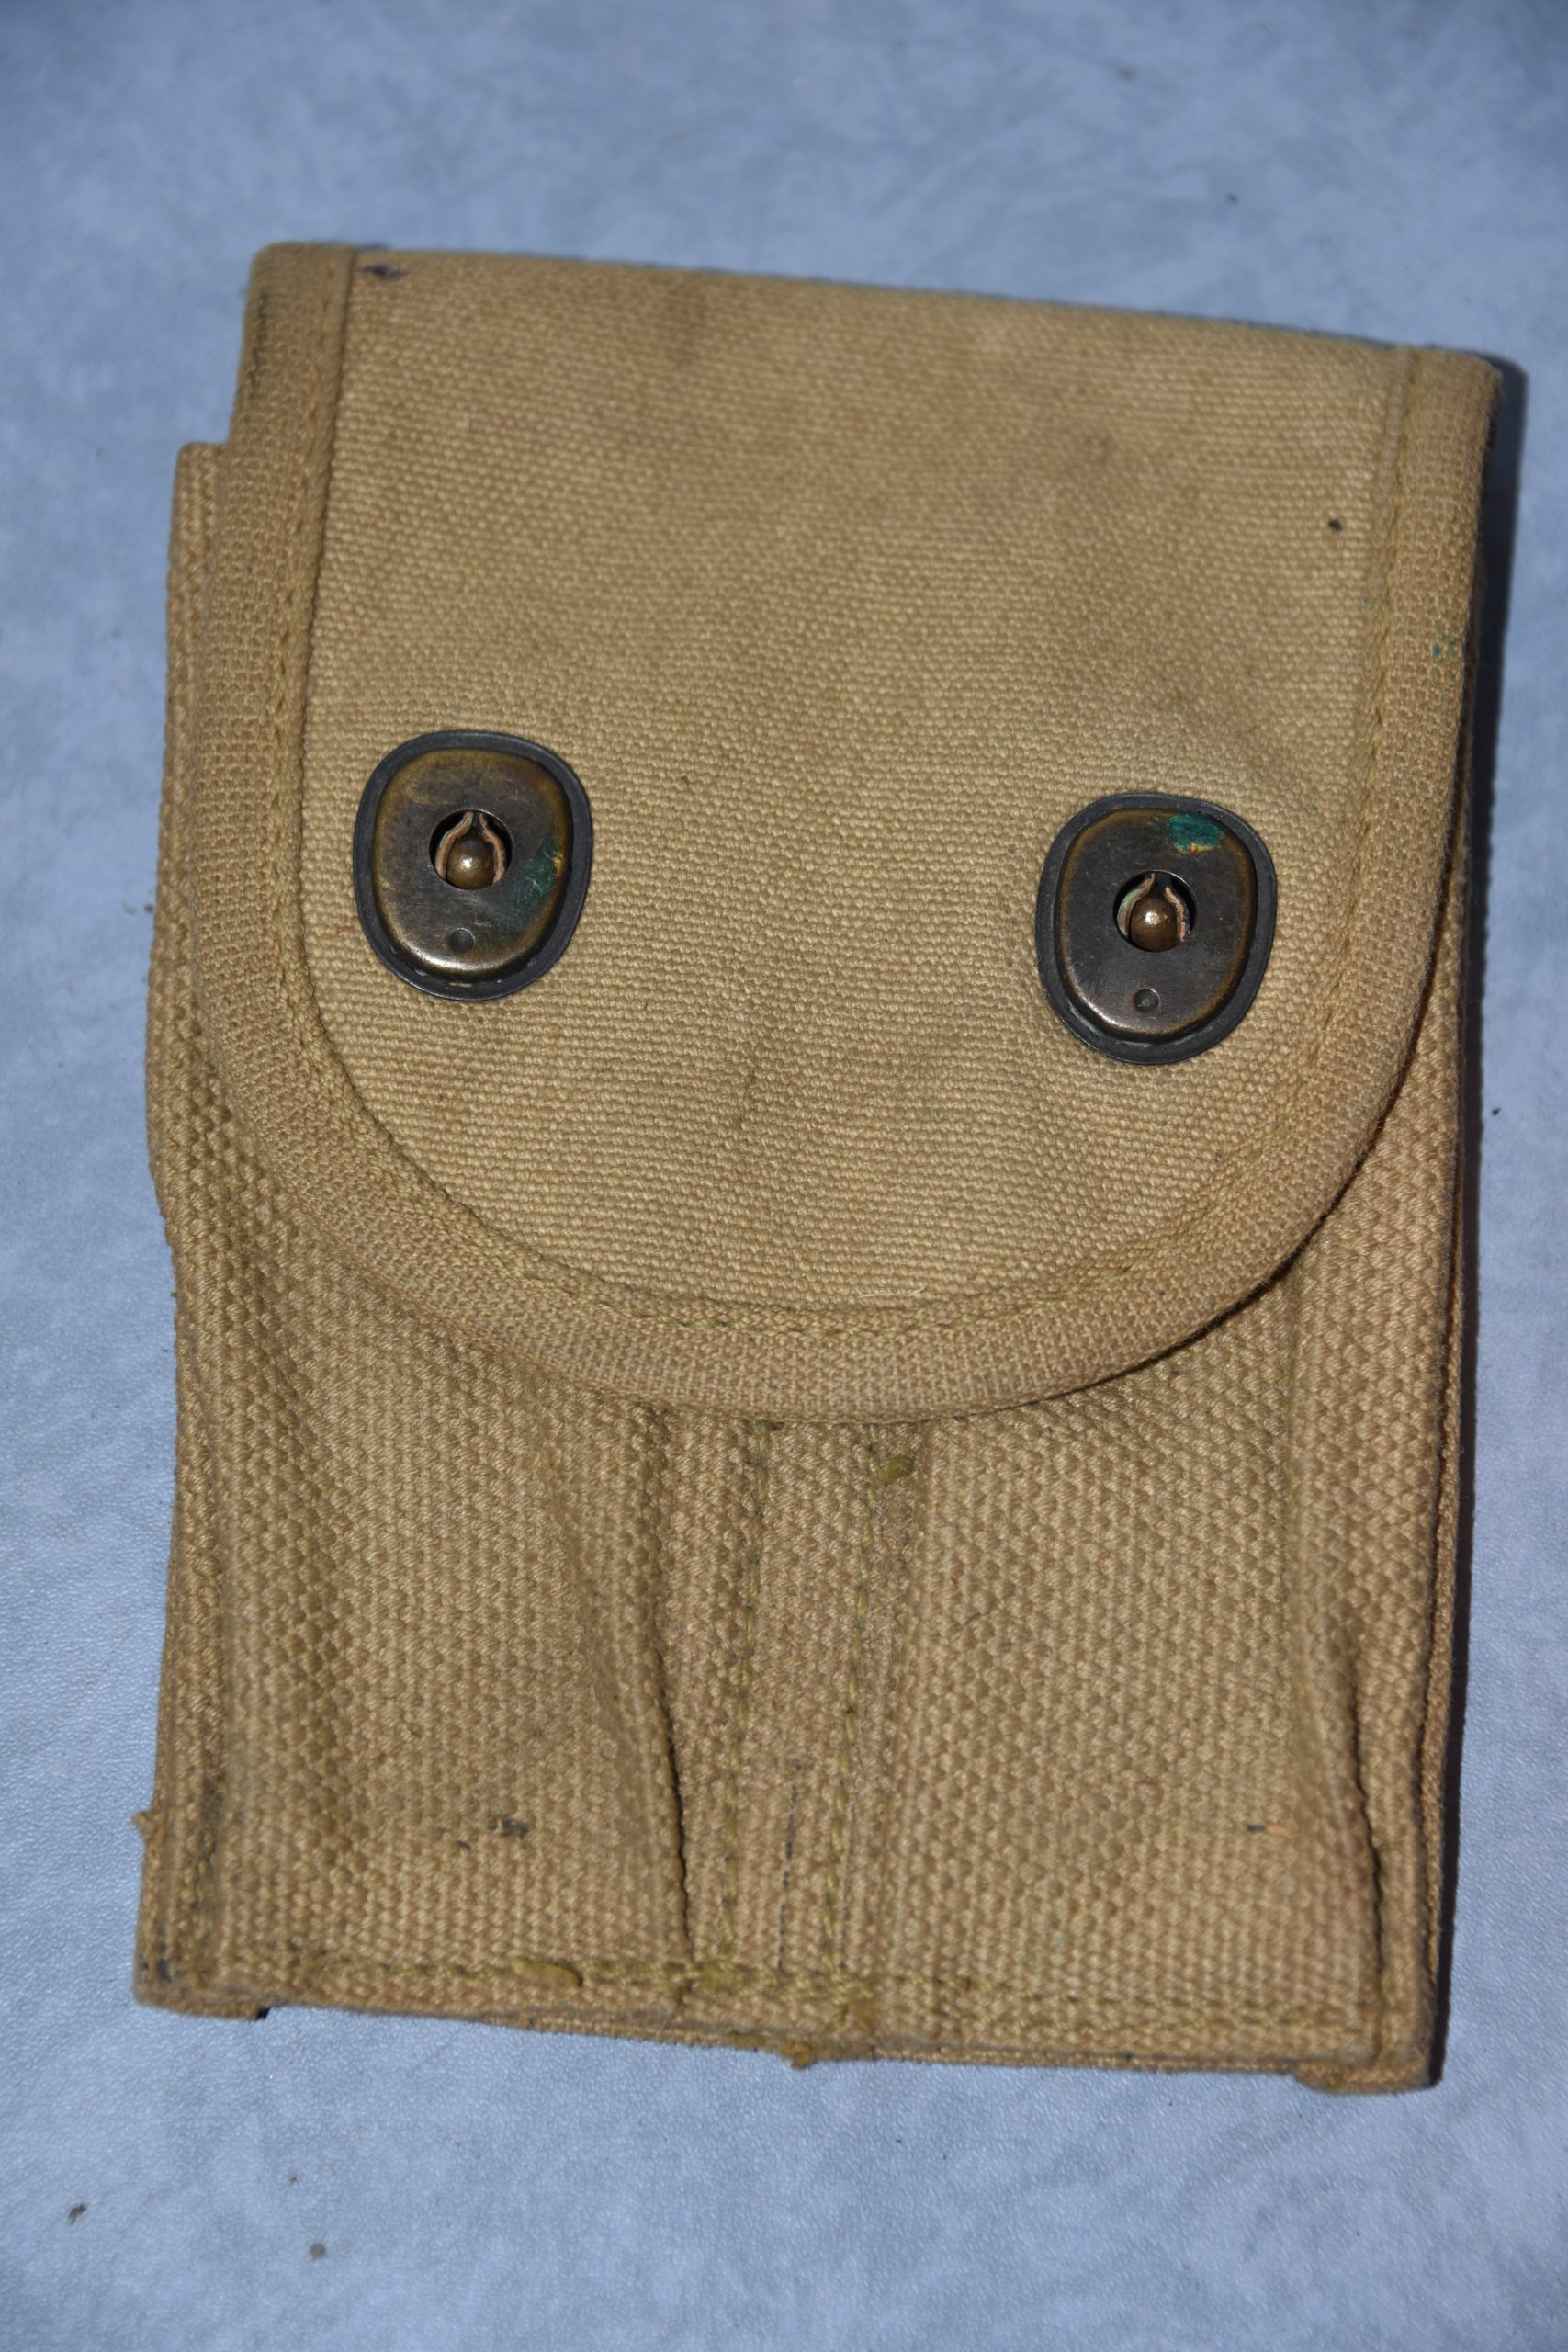 Magazine pouch for the AUTOMATIC Pistol Caliber .45 – German Holsters